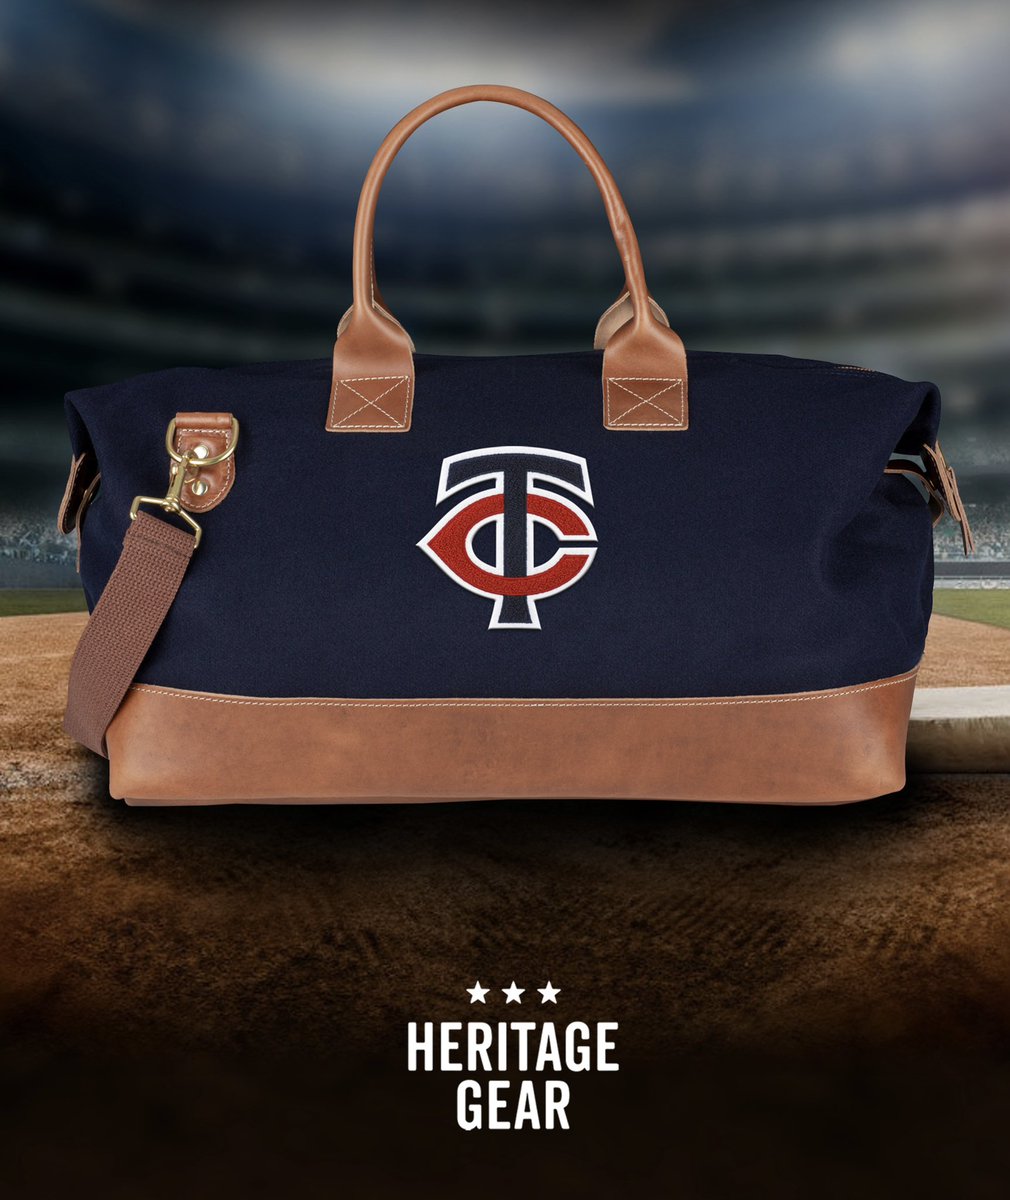 Winning streaks and warm days in May call for a bag to celebrate. Get your @Twins weekender today! It’s an heirloom that lasts a lifetime and showcases your favorite Minnesota baseball team.

Get yours today: heritagegear.com/collections/mi…